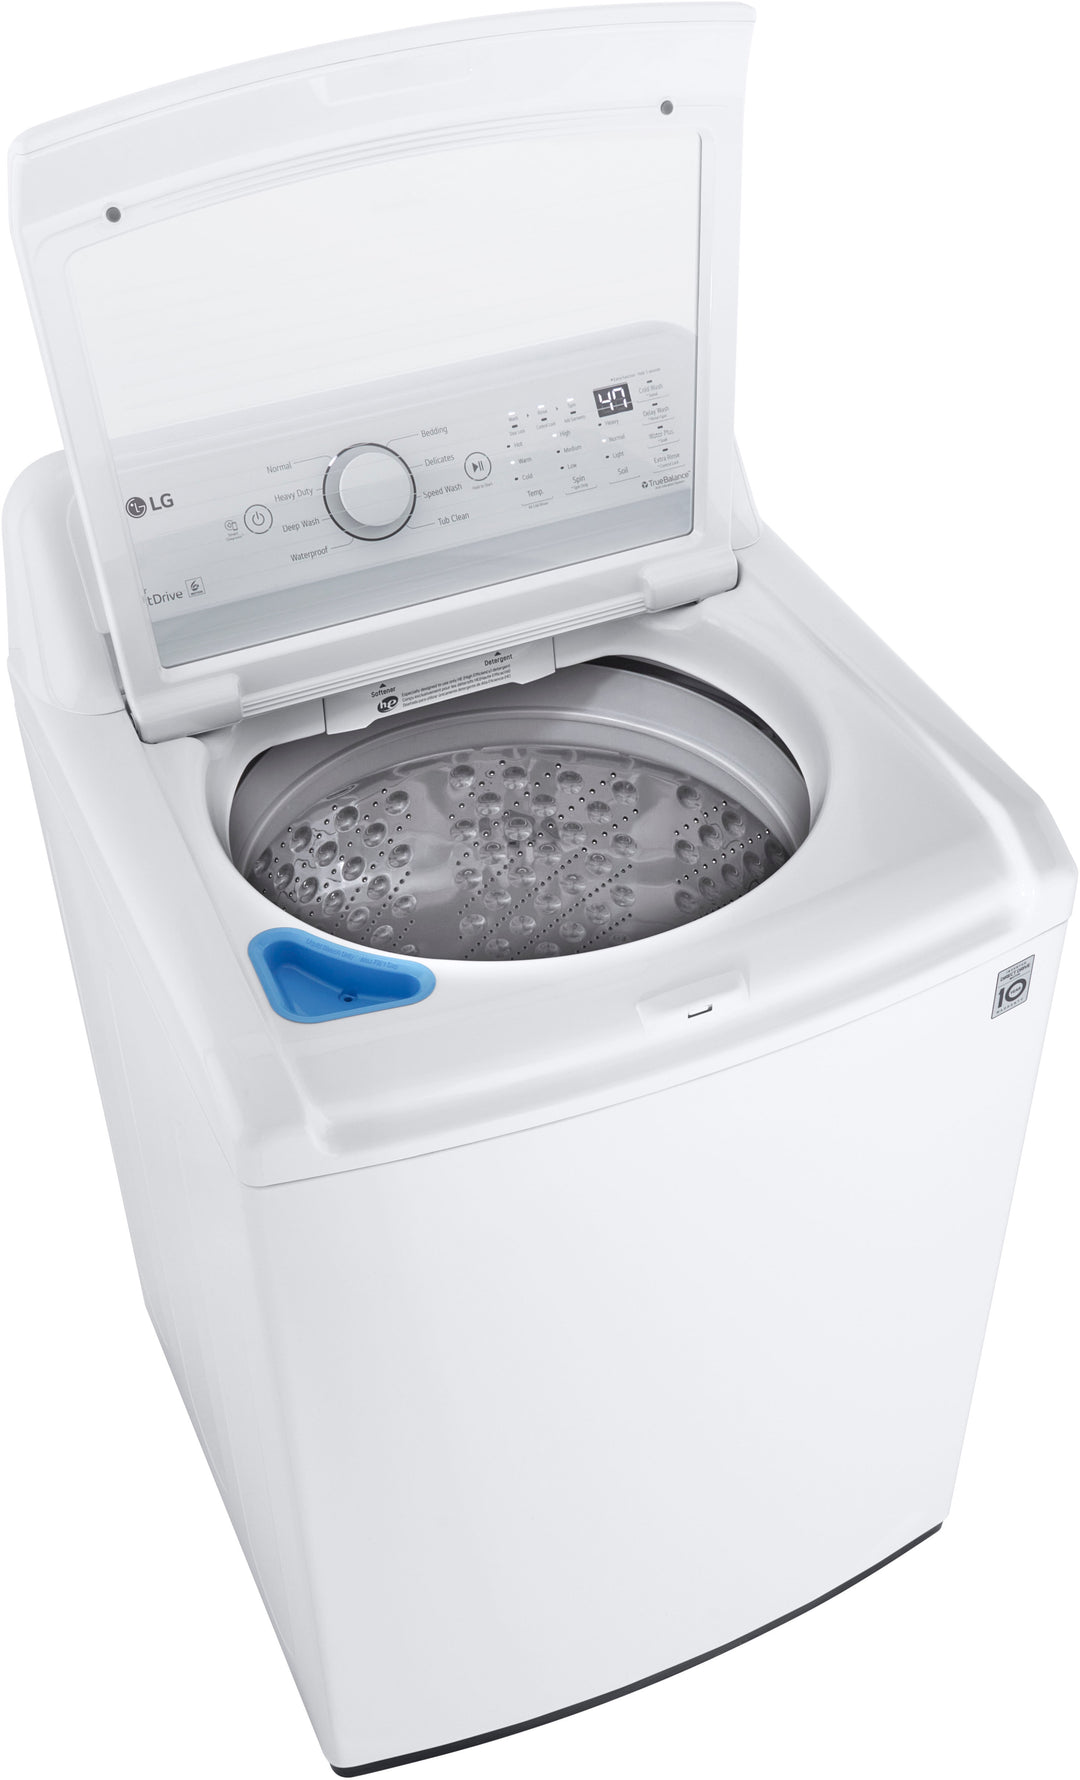 LG - 4.5 Cu. Ft. Smart Top Load Washer with Vibration Reduction and TurboDrum Technology - White_16